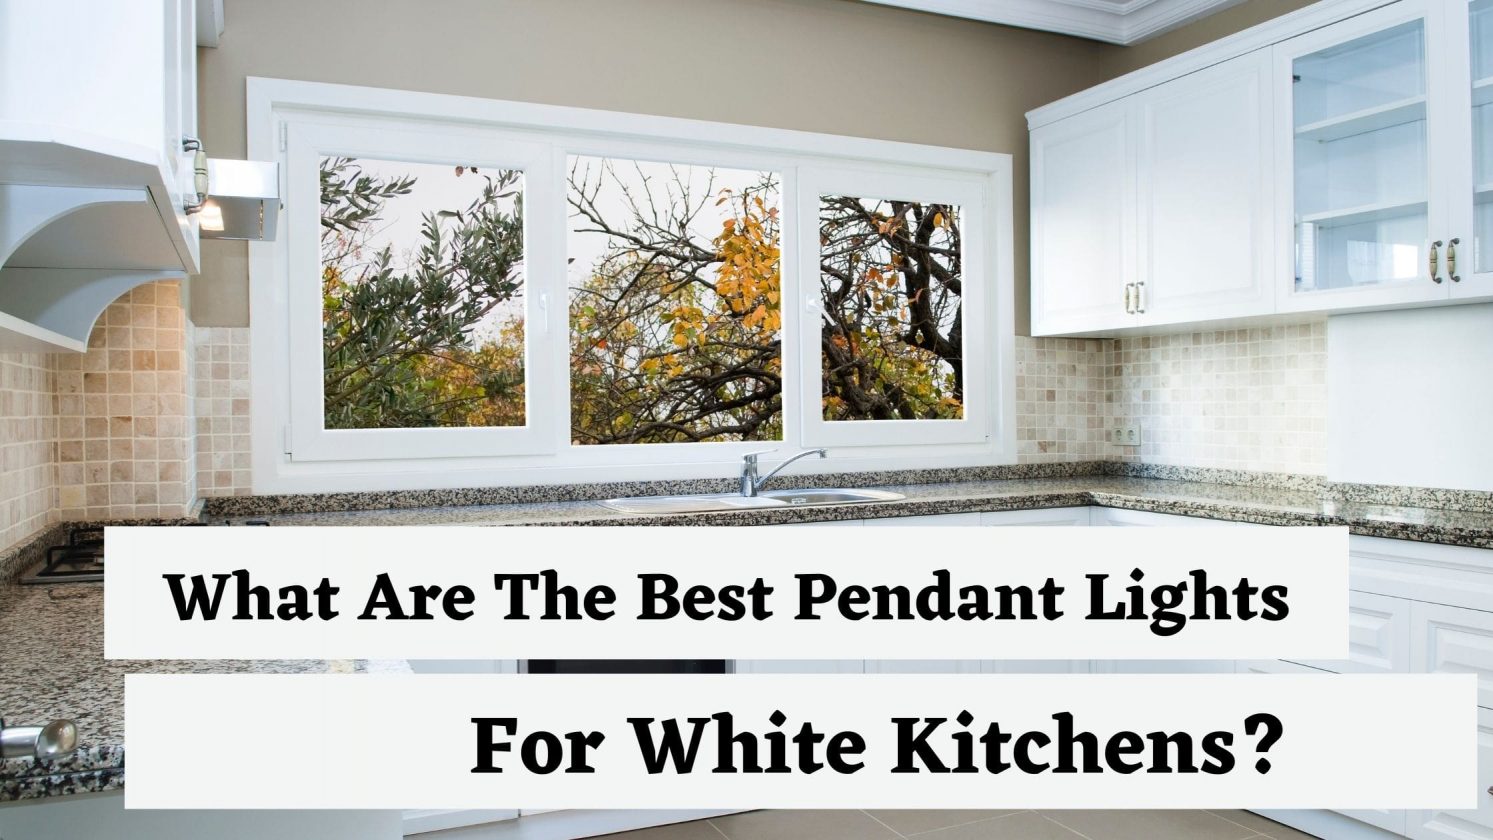 What Are The Best Pendant Lights For White Kitchens?